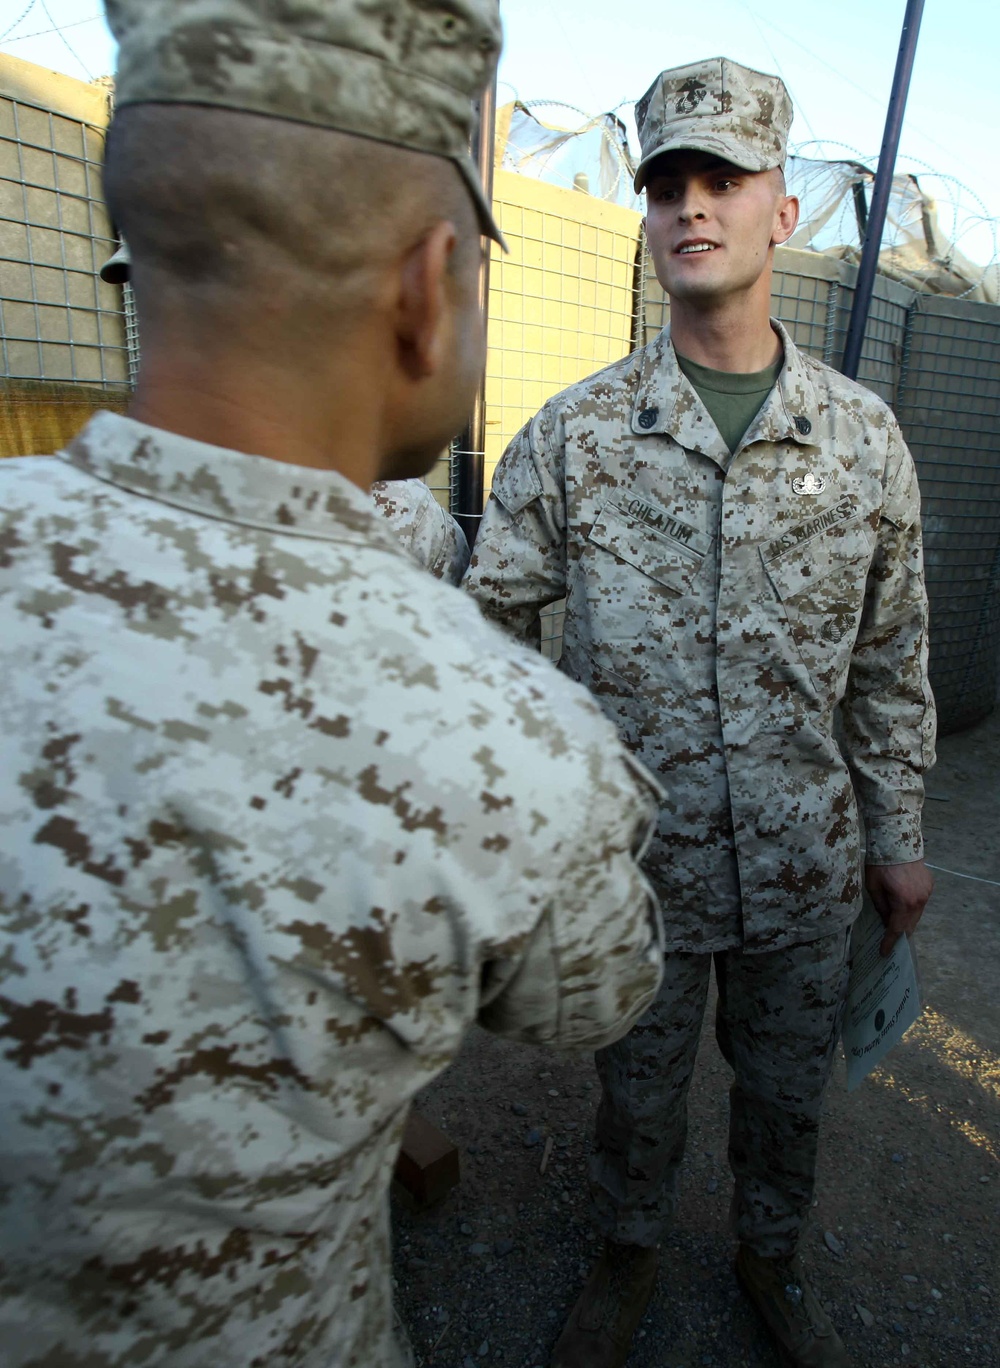 Florida Marine Makes History with Combat Promotion